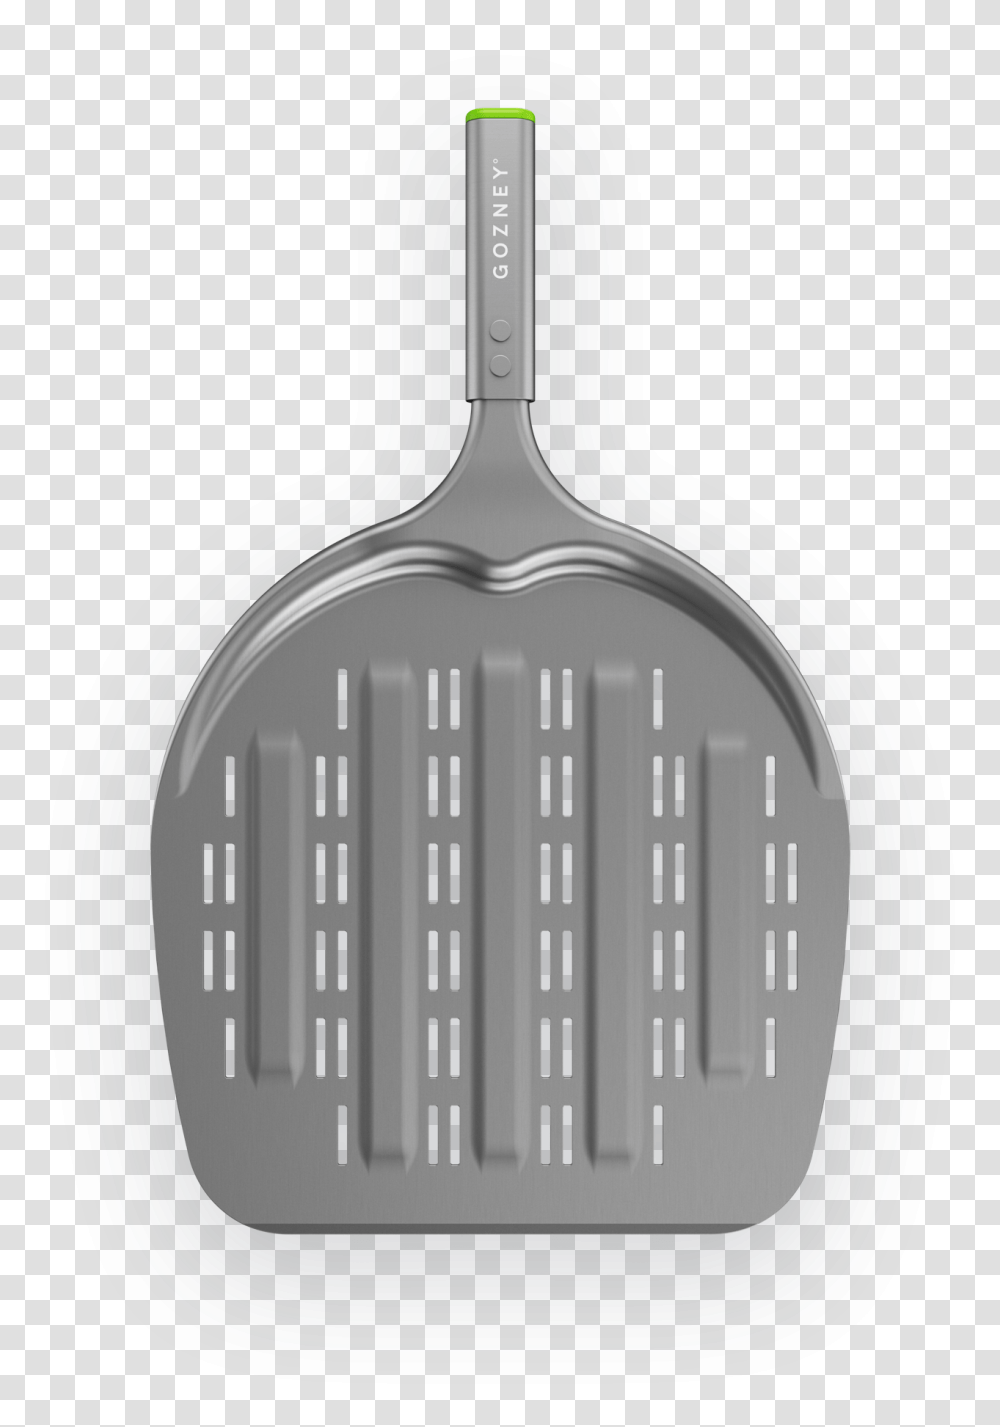 Roblox Jacketpng The Ultimate Pizza Peel Frying Pan, Clock Tower, Architecture, Building, Bathroom Transparent Png